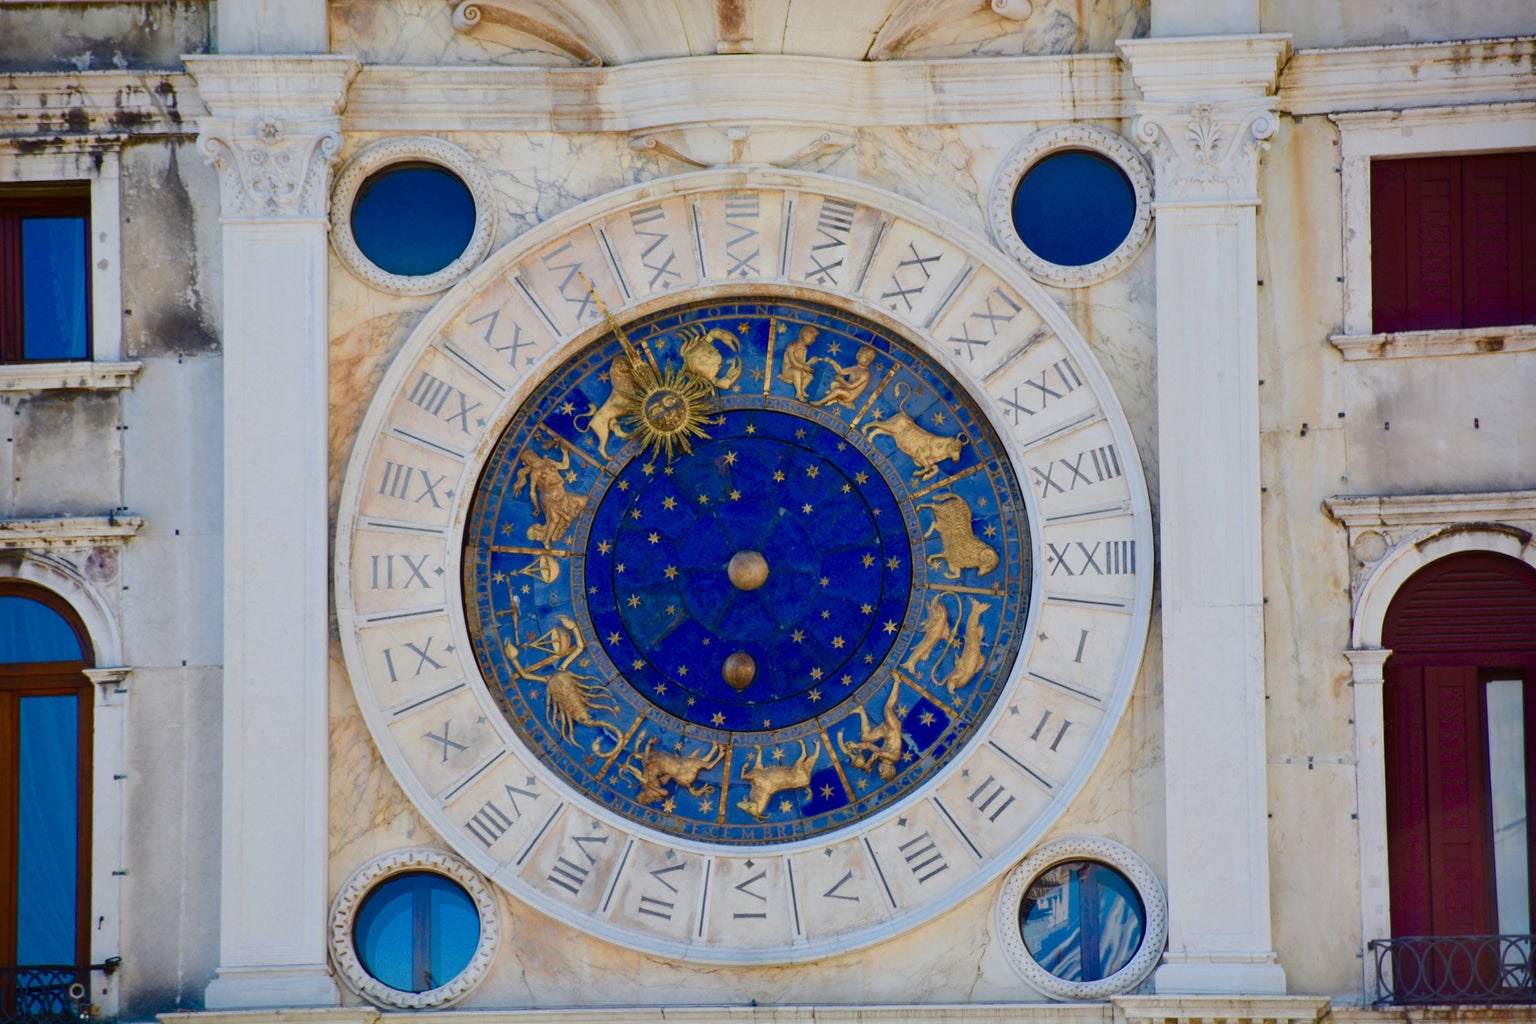 Zodiac signs on building